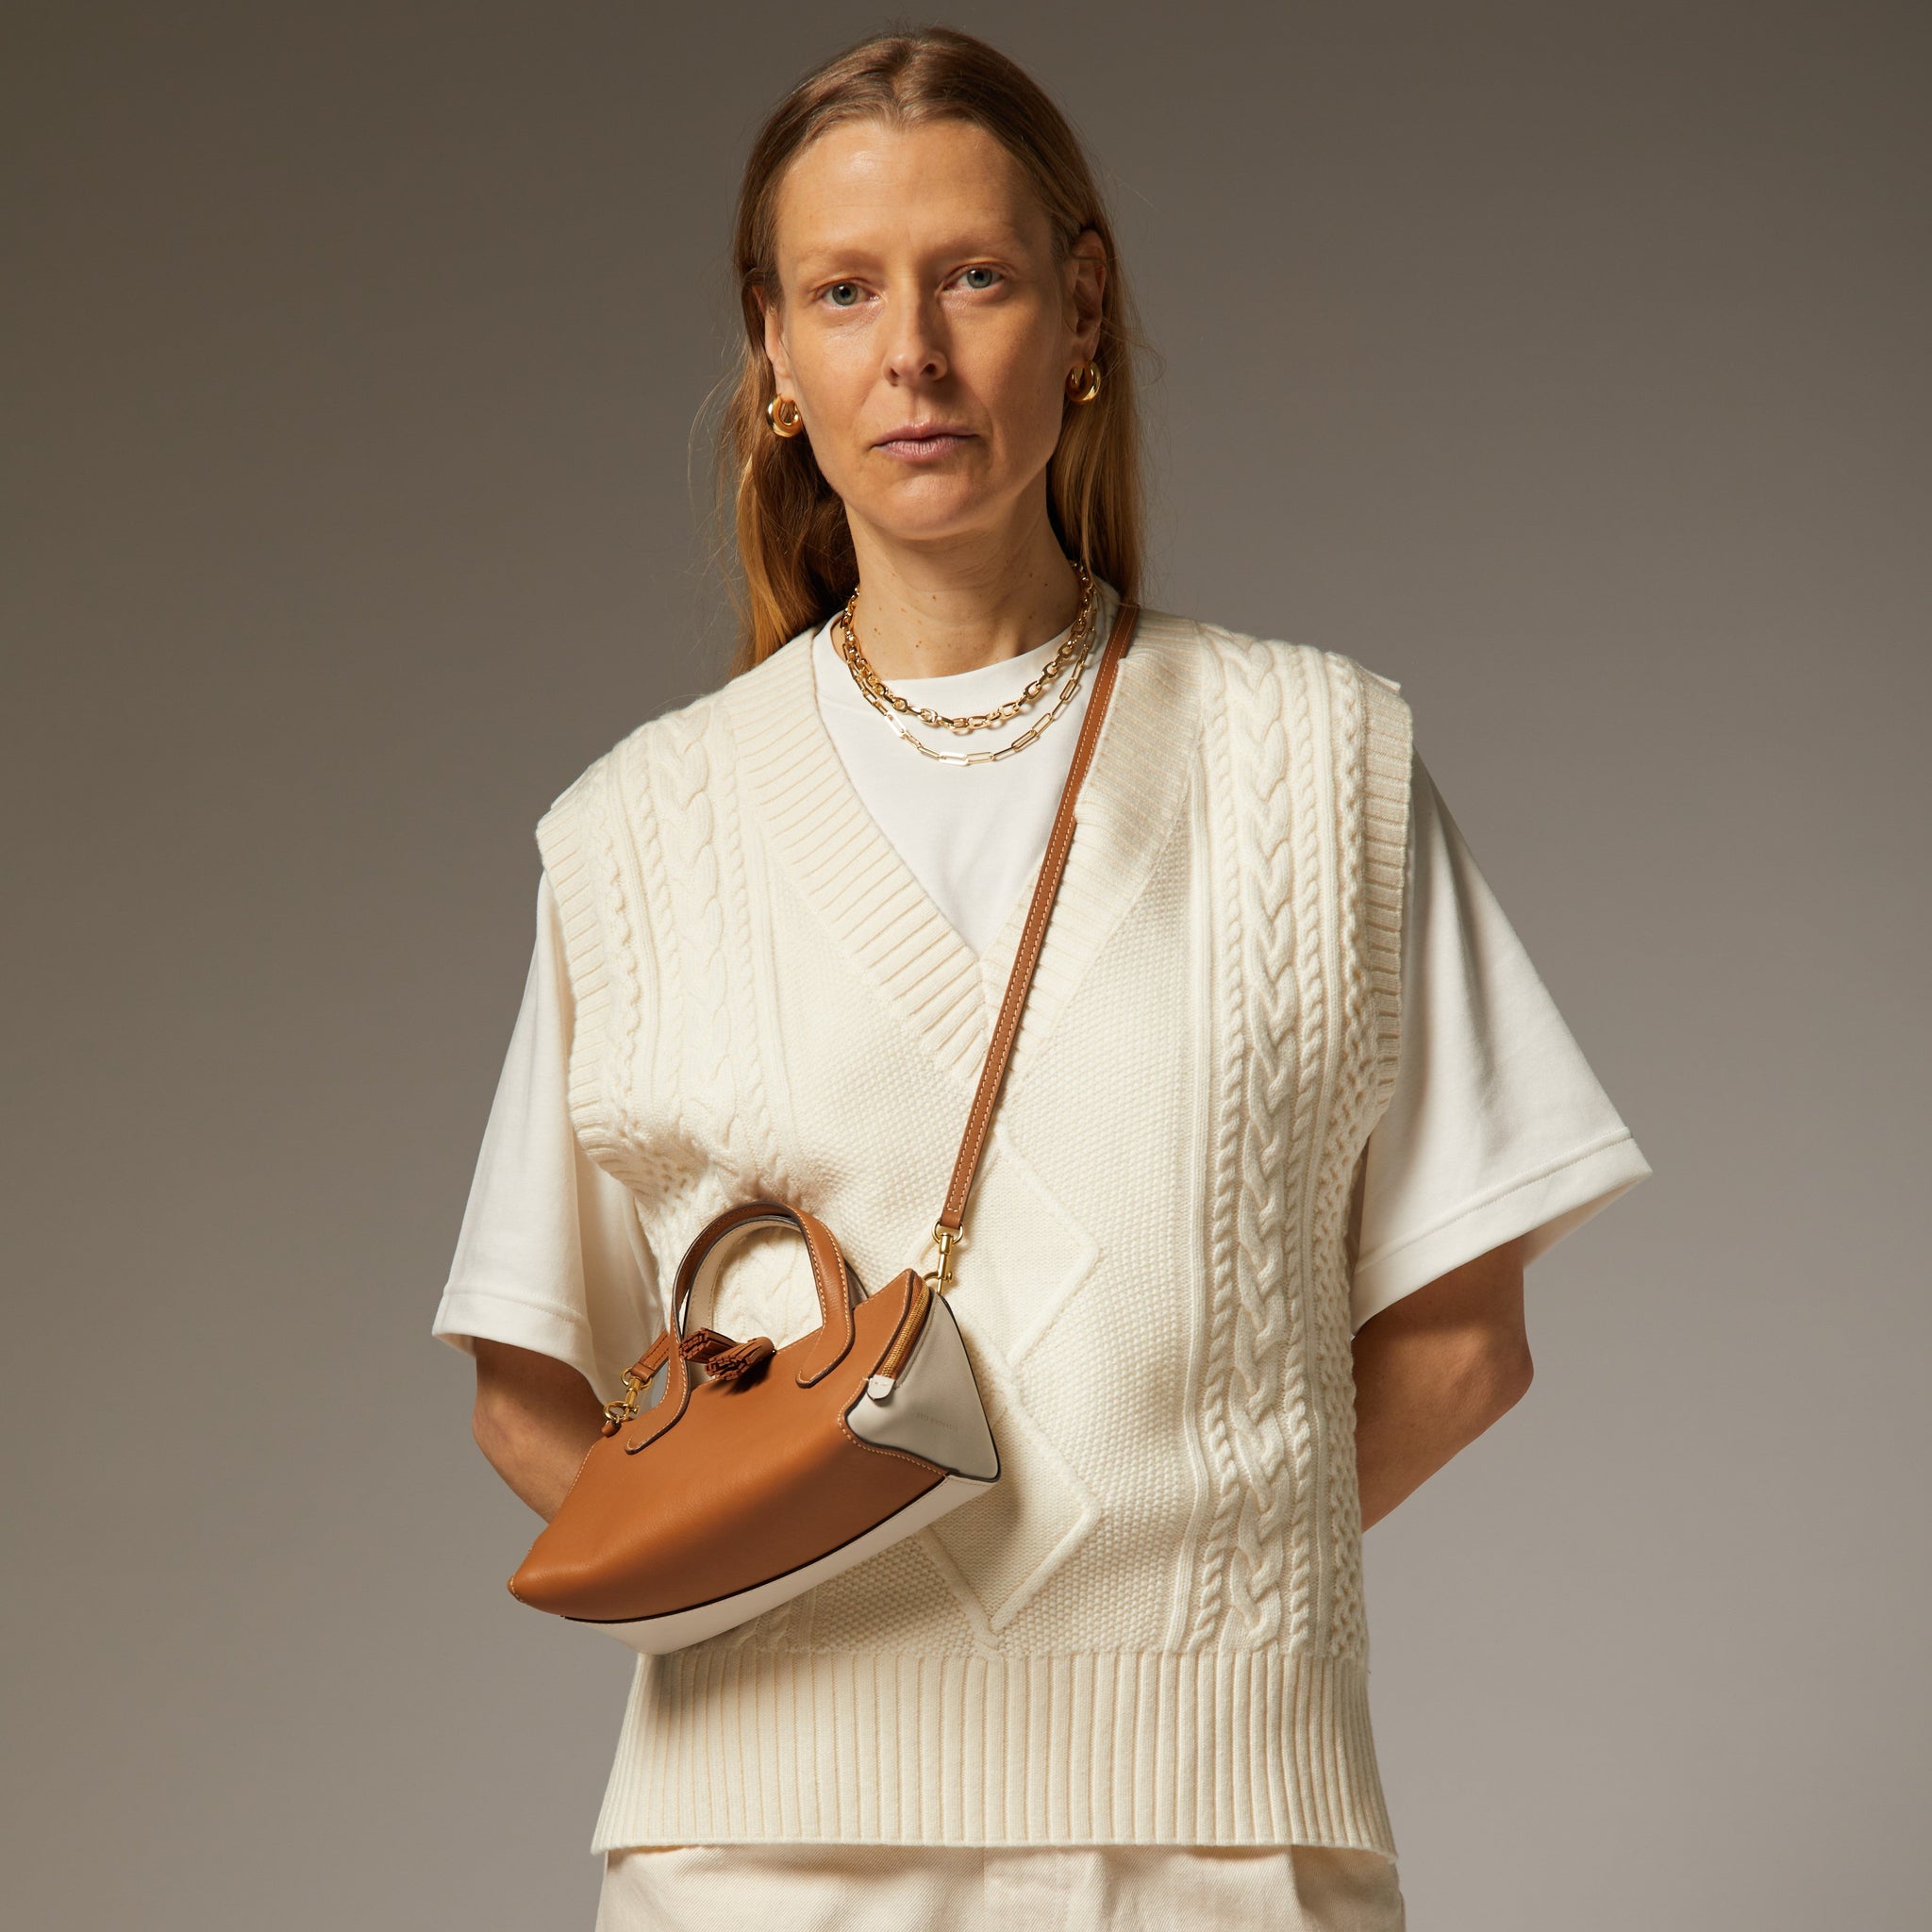 Small Wedge Cross-body -

                  
                    Calf Leather in Pecan/Chalk -
                  

                  Anya Hindmarch US
